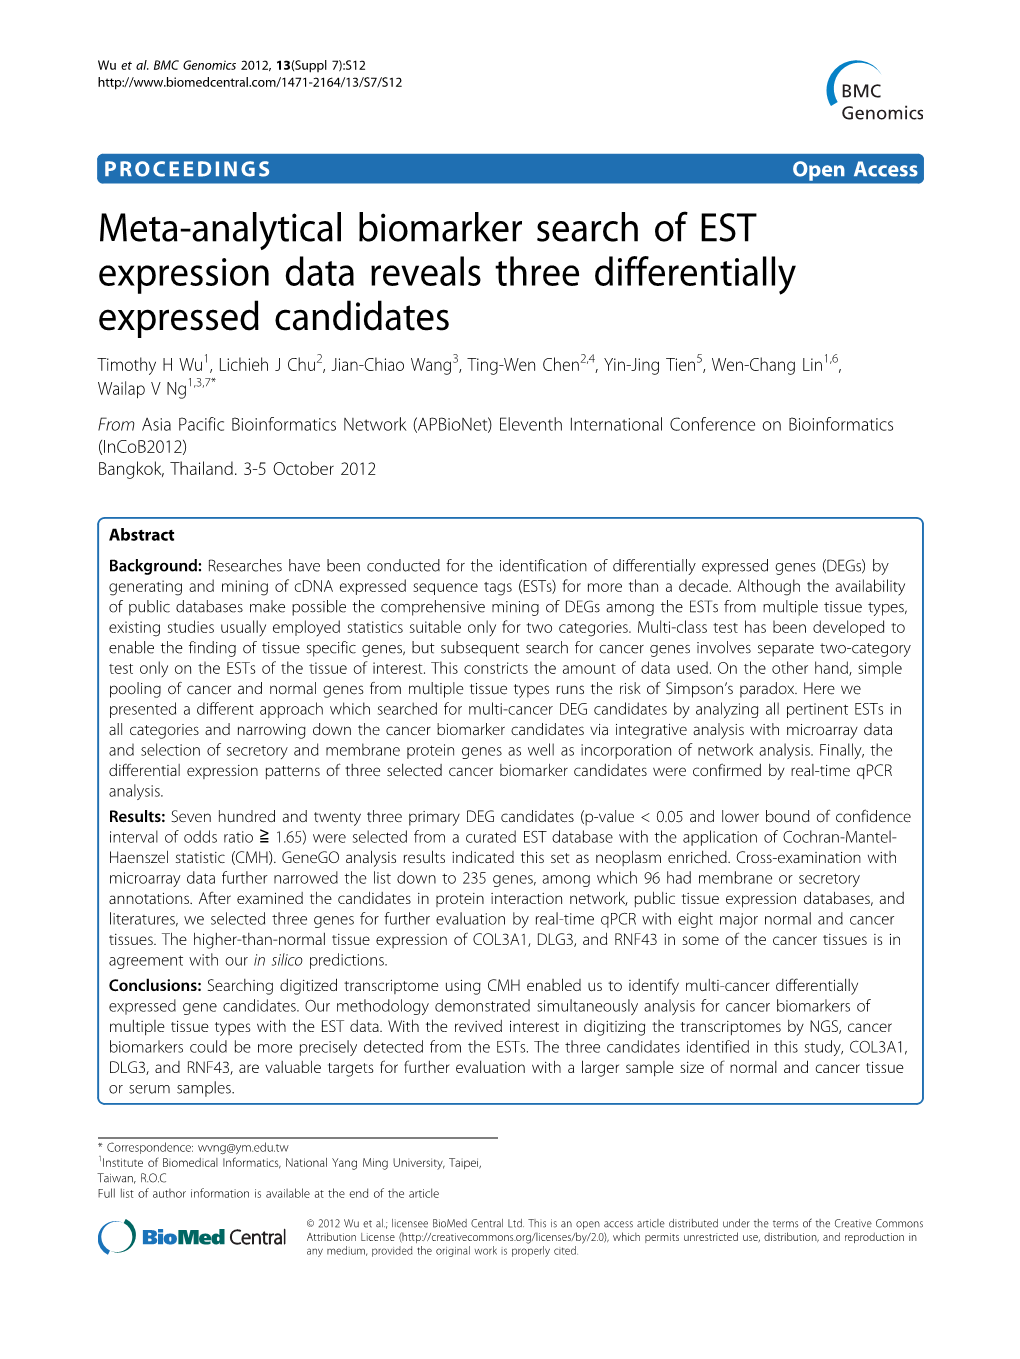 Meta-Analytical Biomarker Search of EST Expression Data Reveals Three